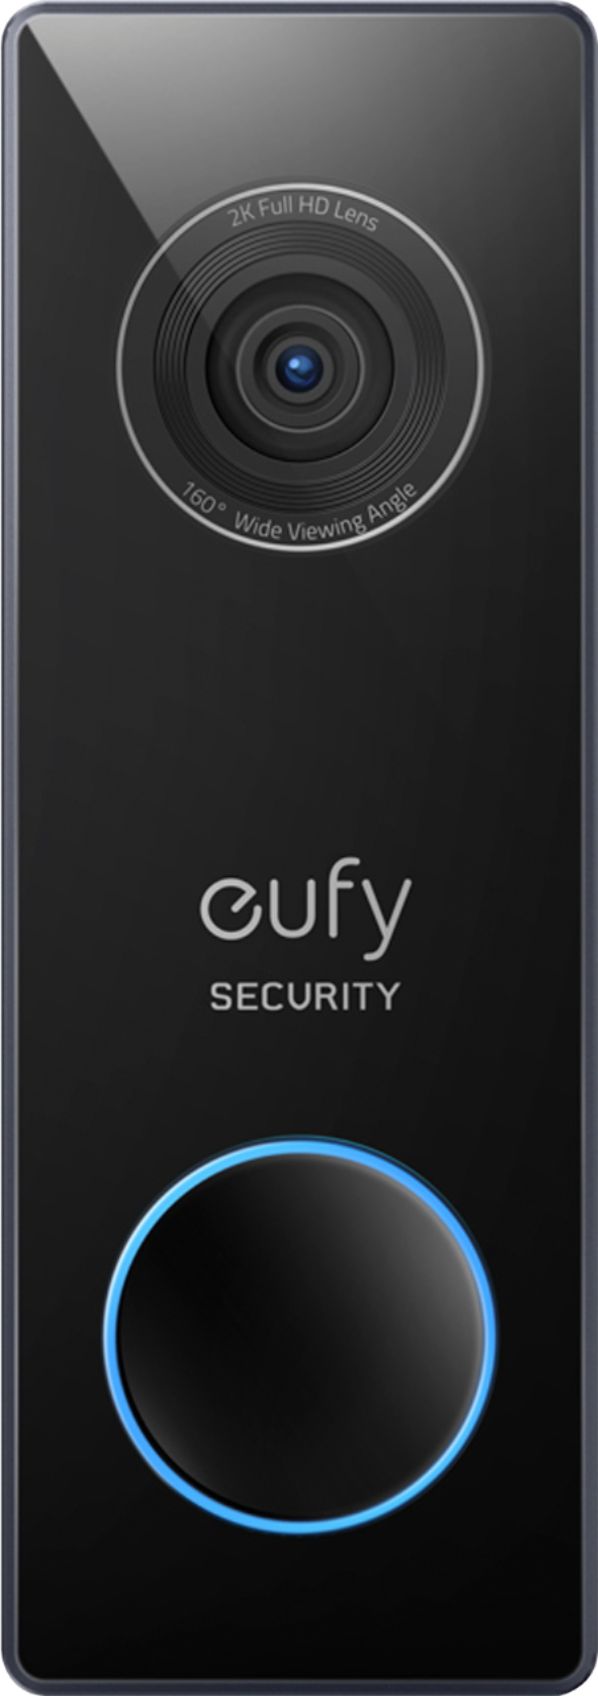 eufy Security - Smart Wi-Fi Video Doorbell 2K Pro Wired